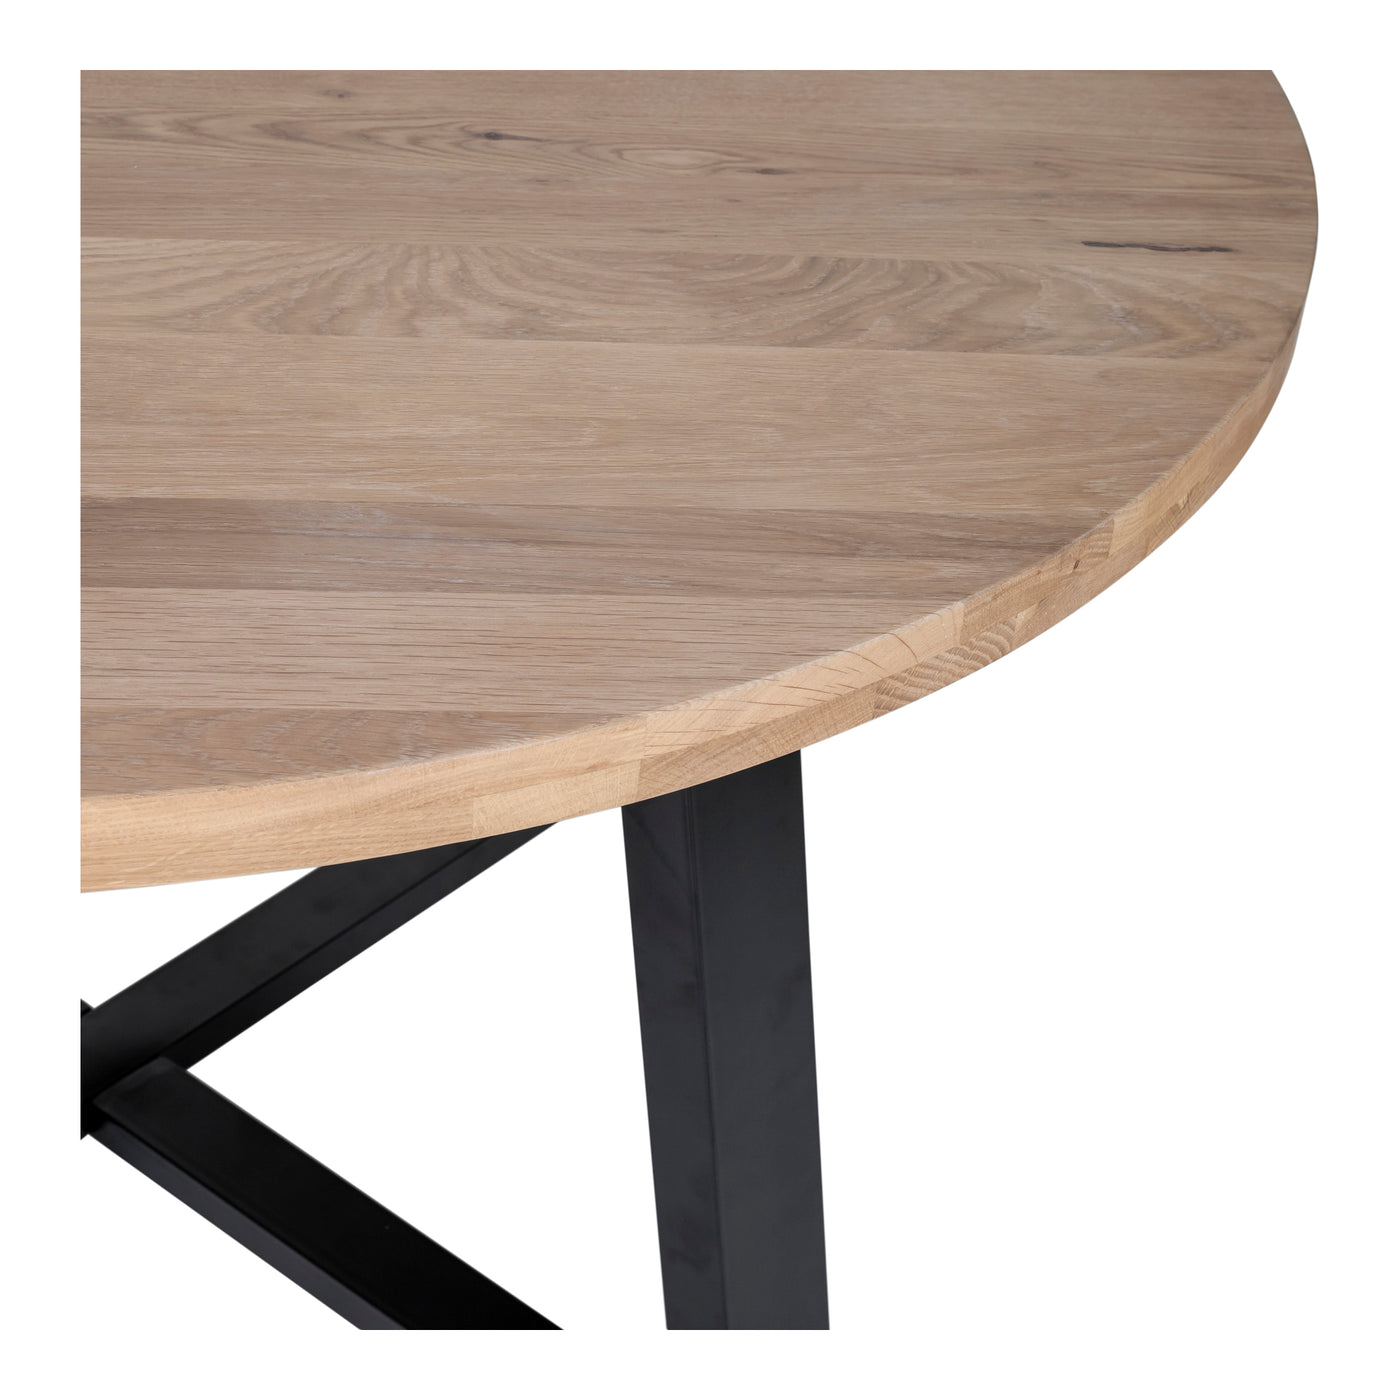 The Mila dining table molds the beauty of nature with contemporary design. A round live edge tabletop made from a spacious...